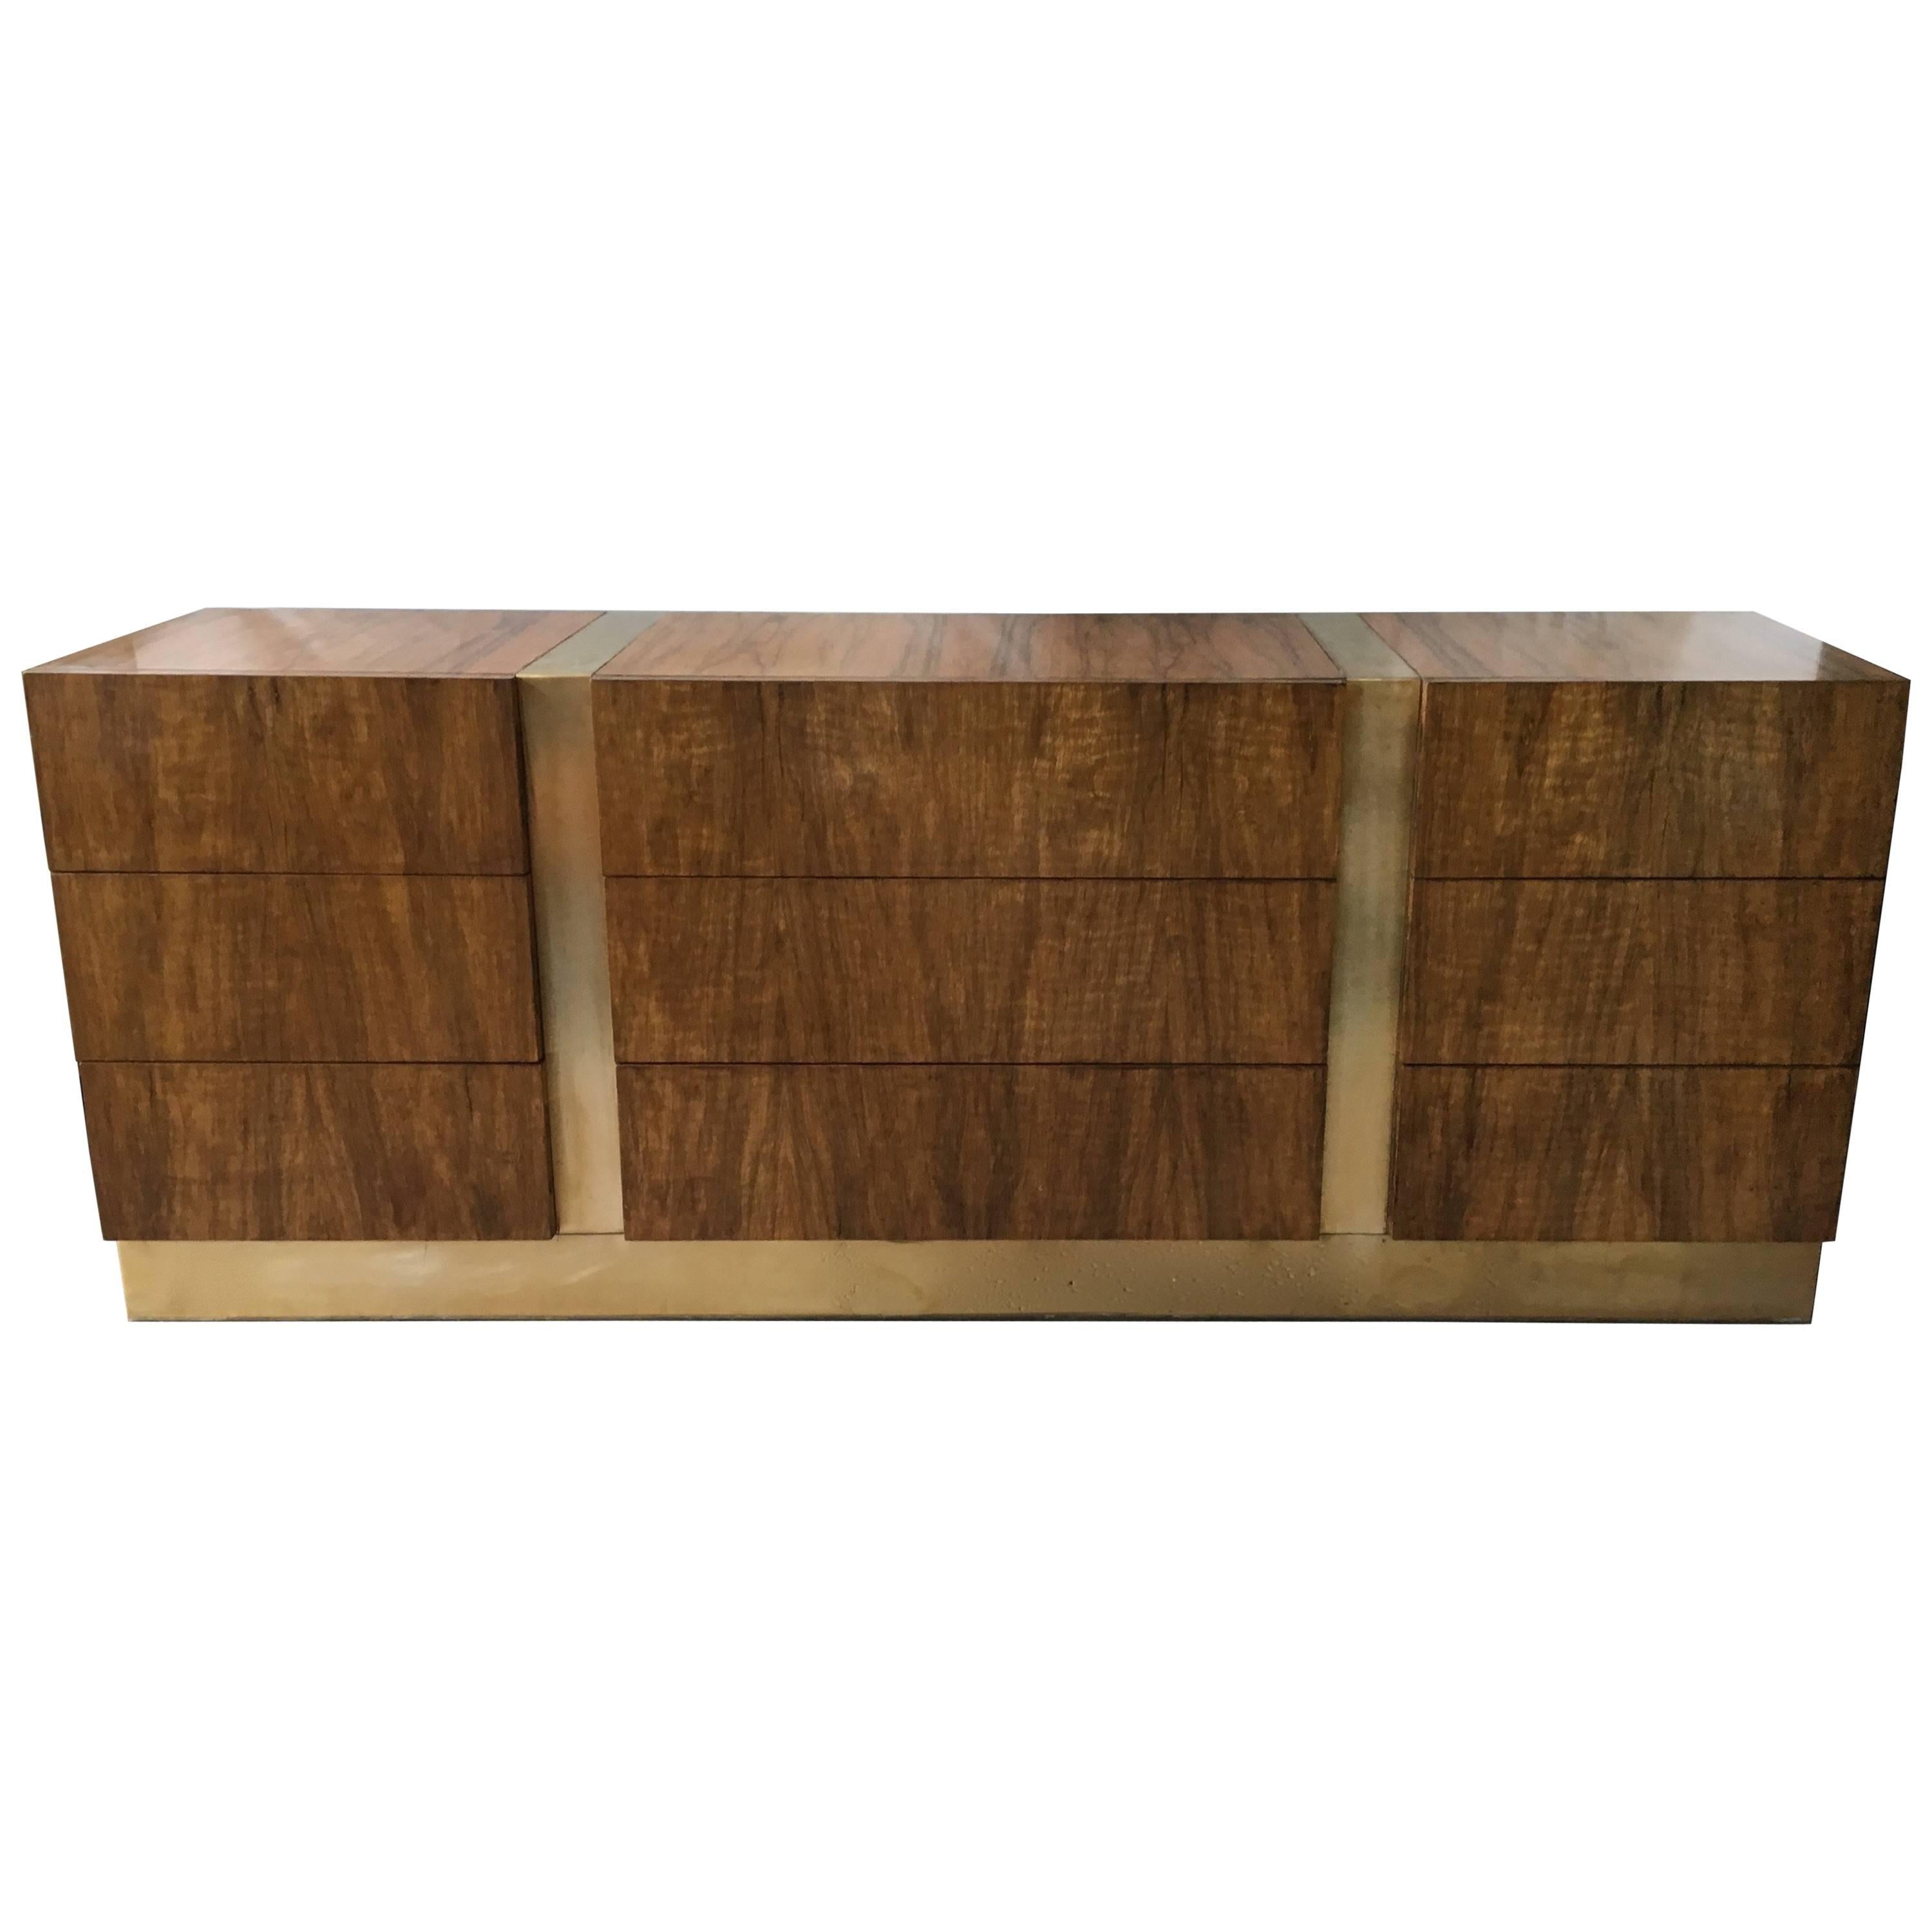 Milo Baughman for Thayer Coggin Rosewood and Brass Sideboard with All Drawers